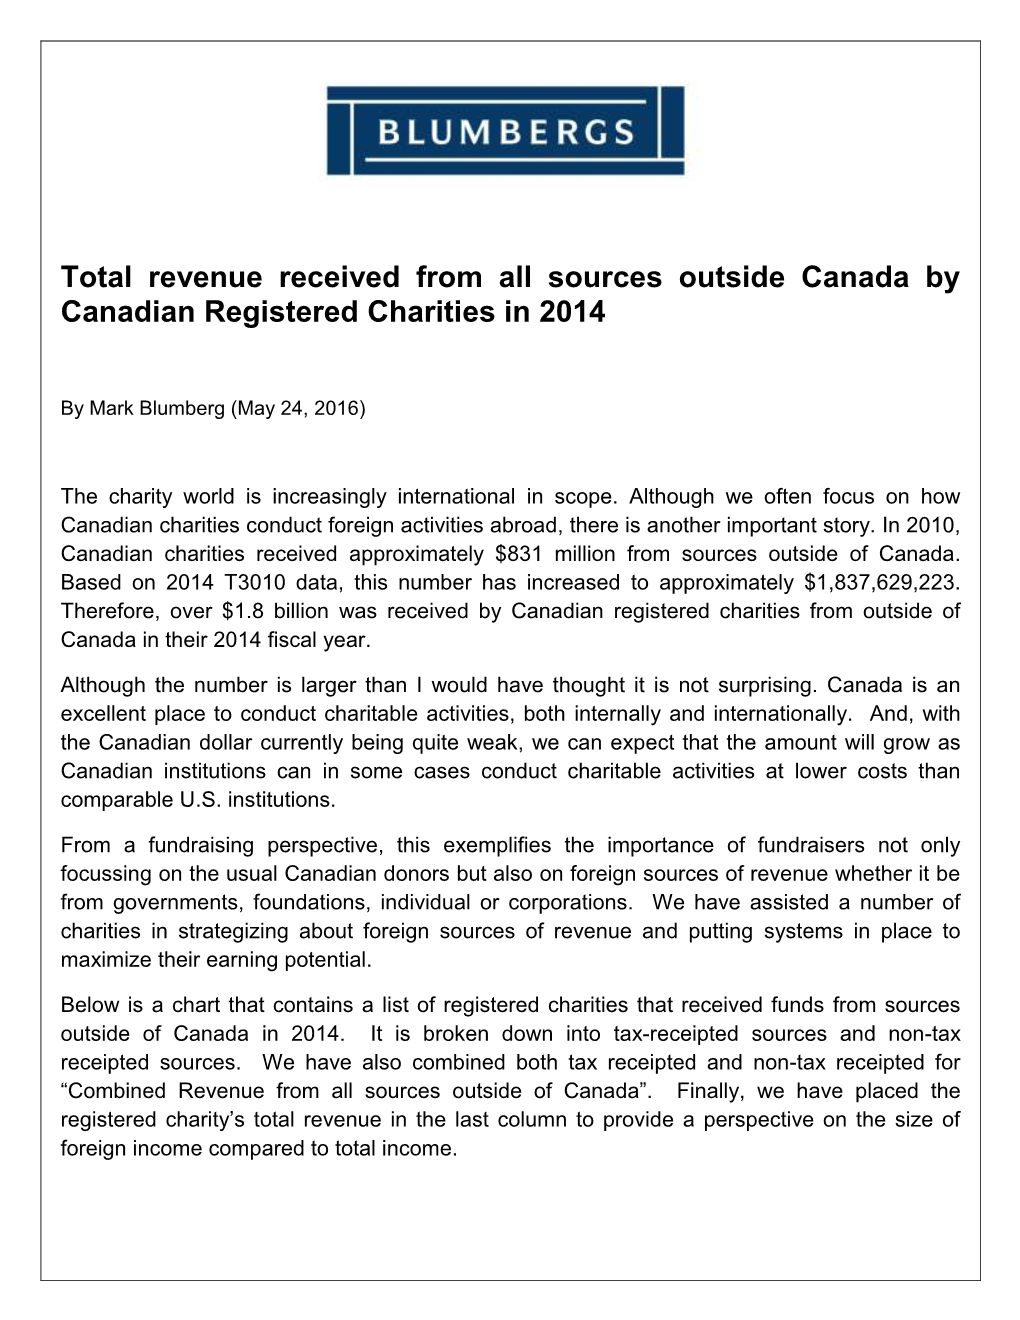 Total Revenue Received from All Sources Outside Canada by Canadian Registered Charities in 2014